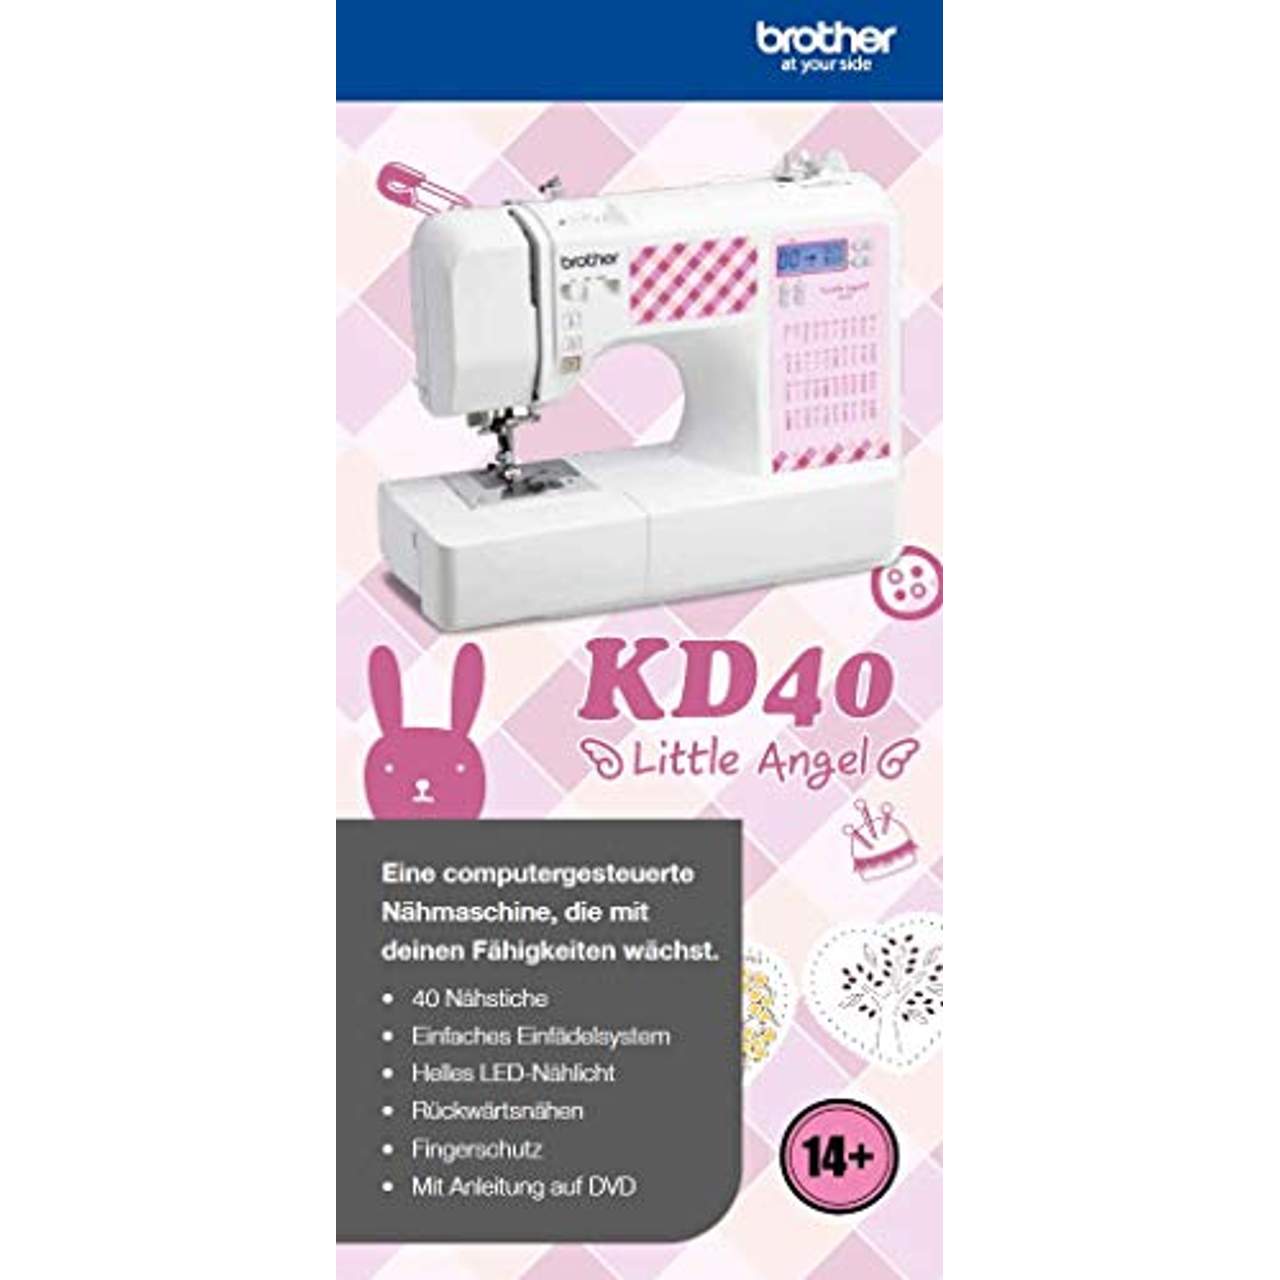 Brother KD40 Little Angel